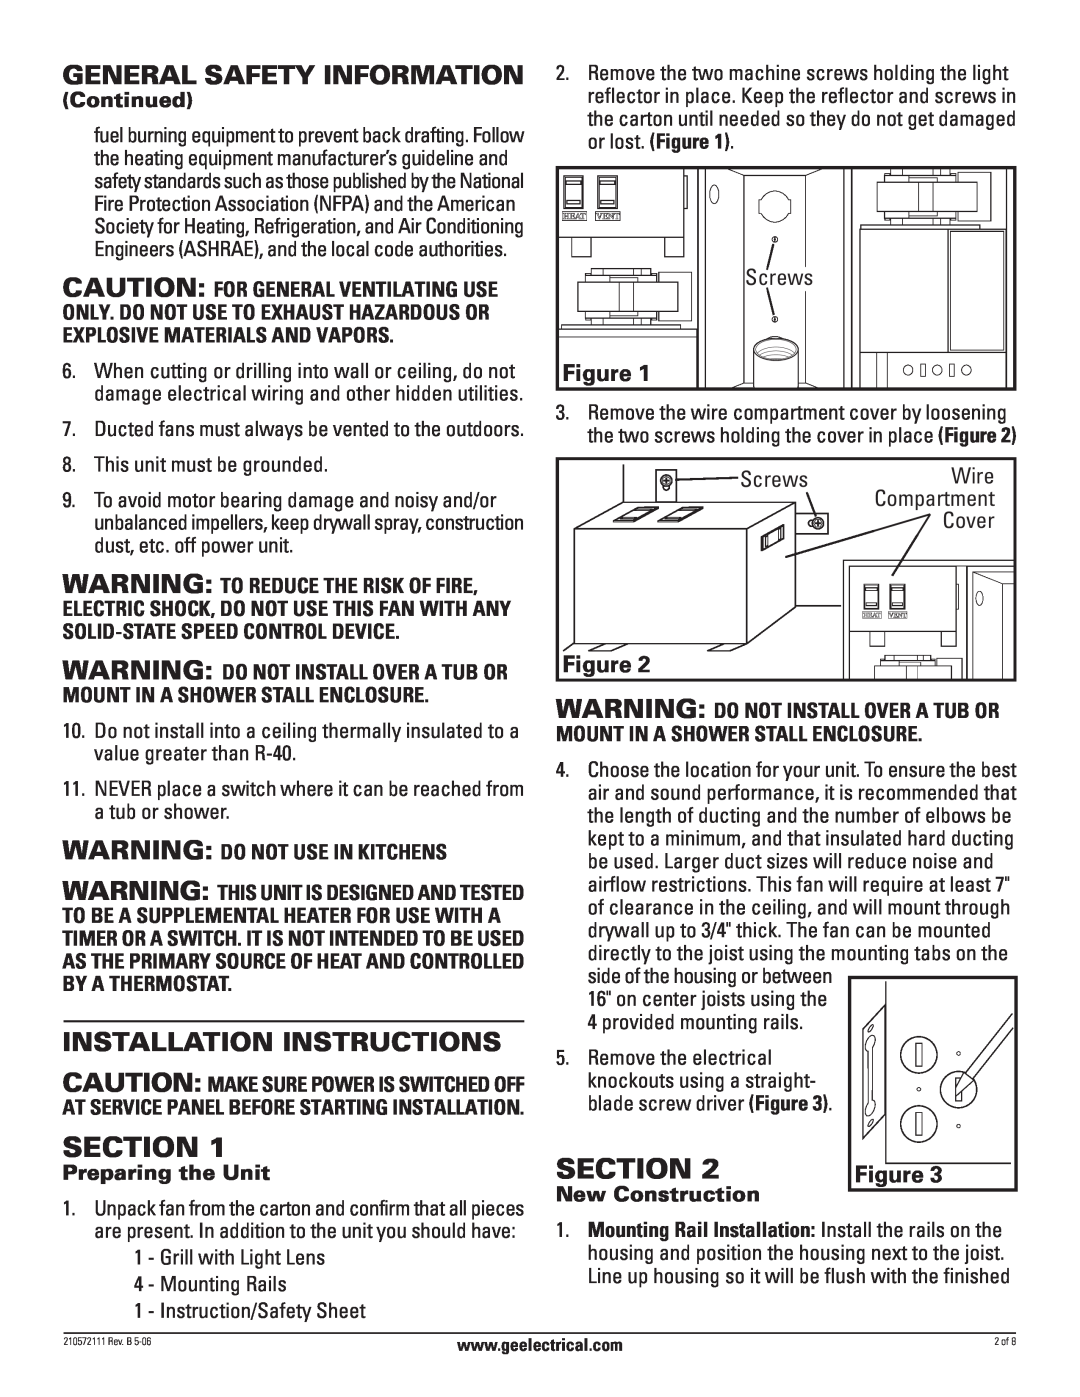 GE BFLH85L manual Section, General Safety Information, Installation Instructions, Continued, Warning Do Not Use In Kitchens 